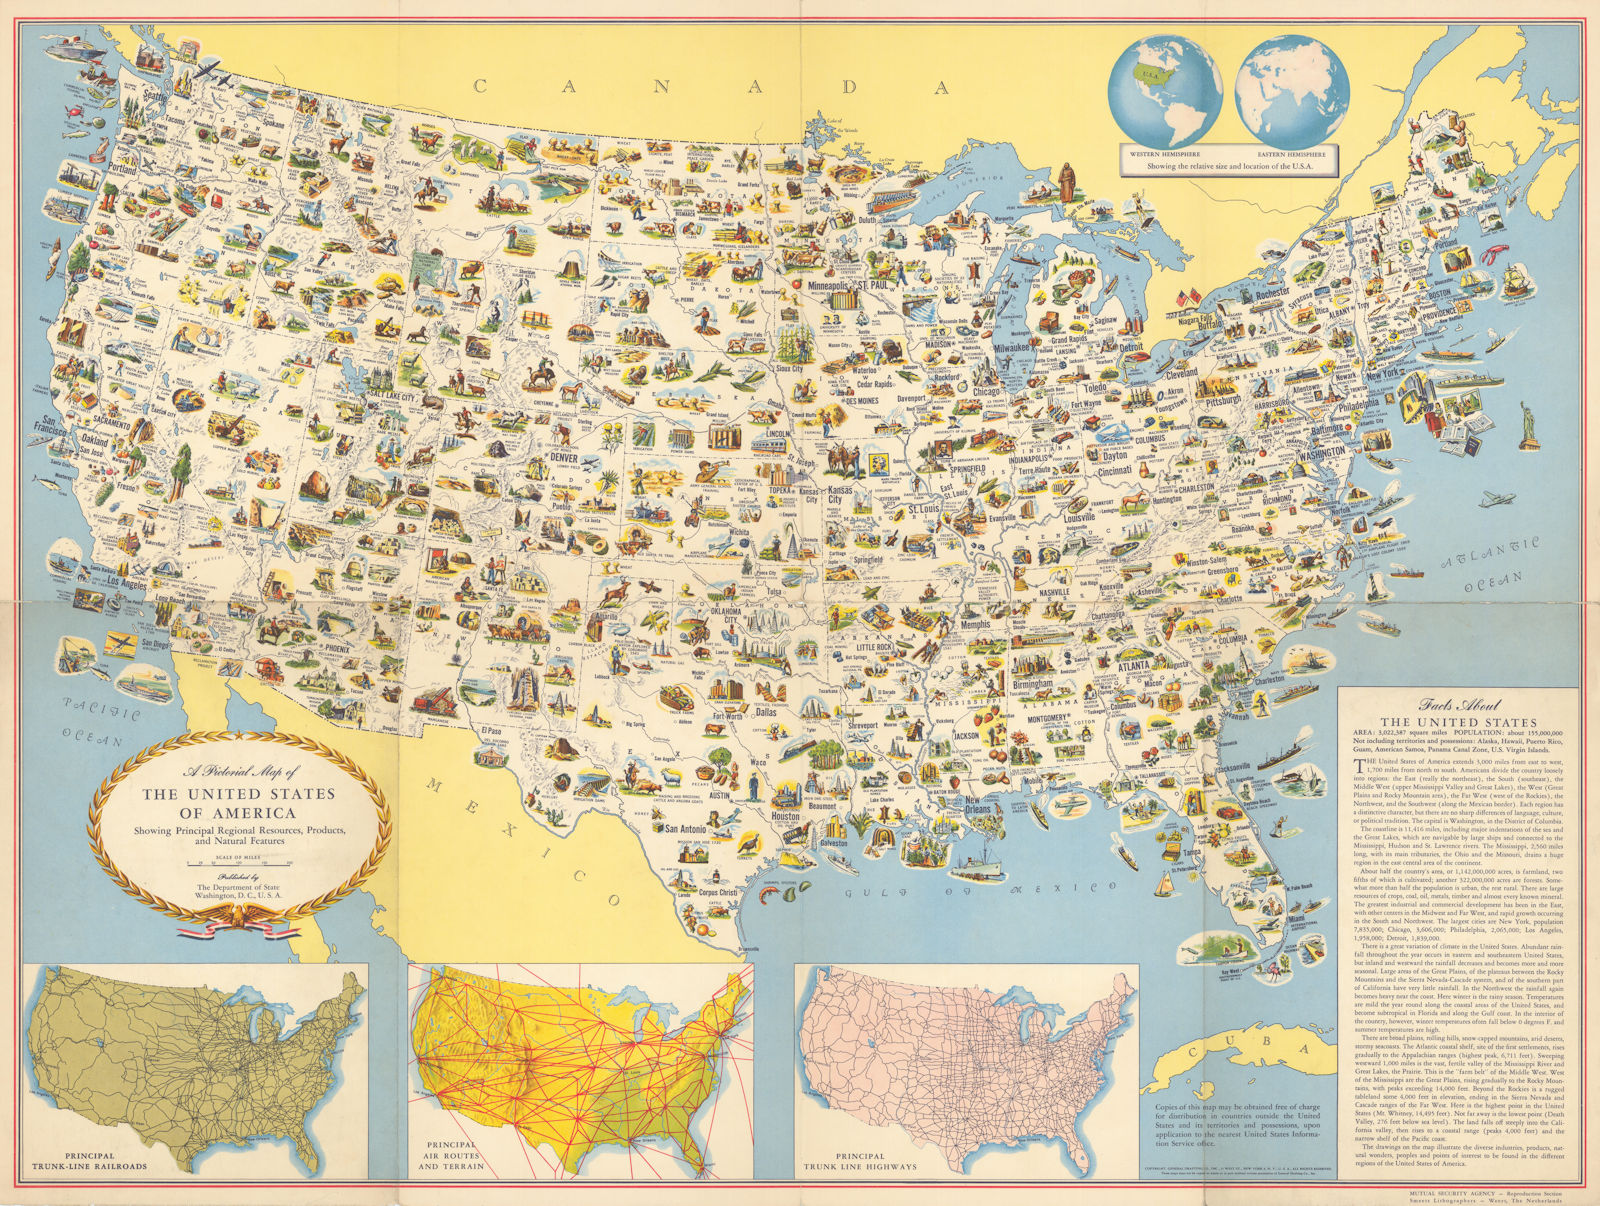 A Pictorial Map of the United States of America. 24x31 inches folding map c1951